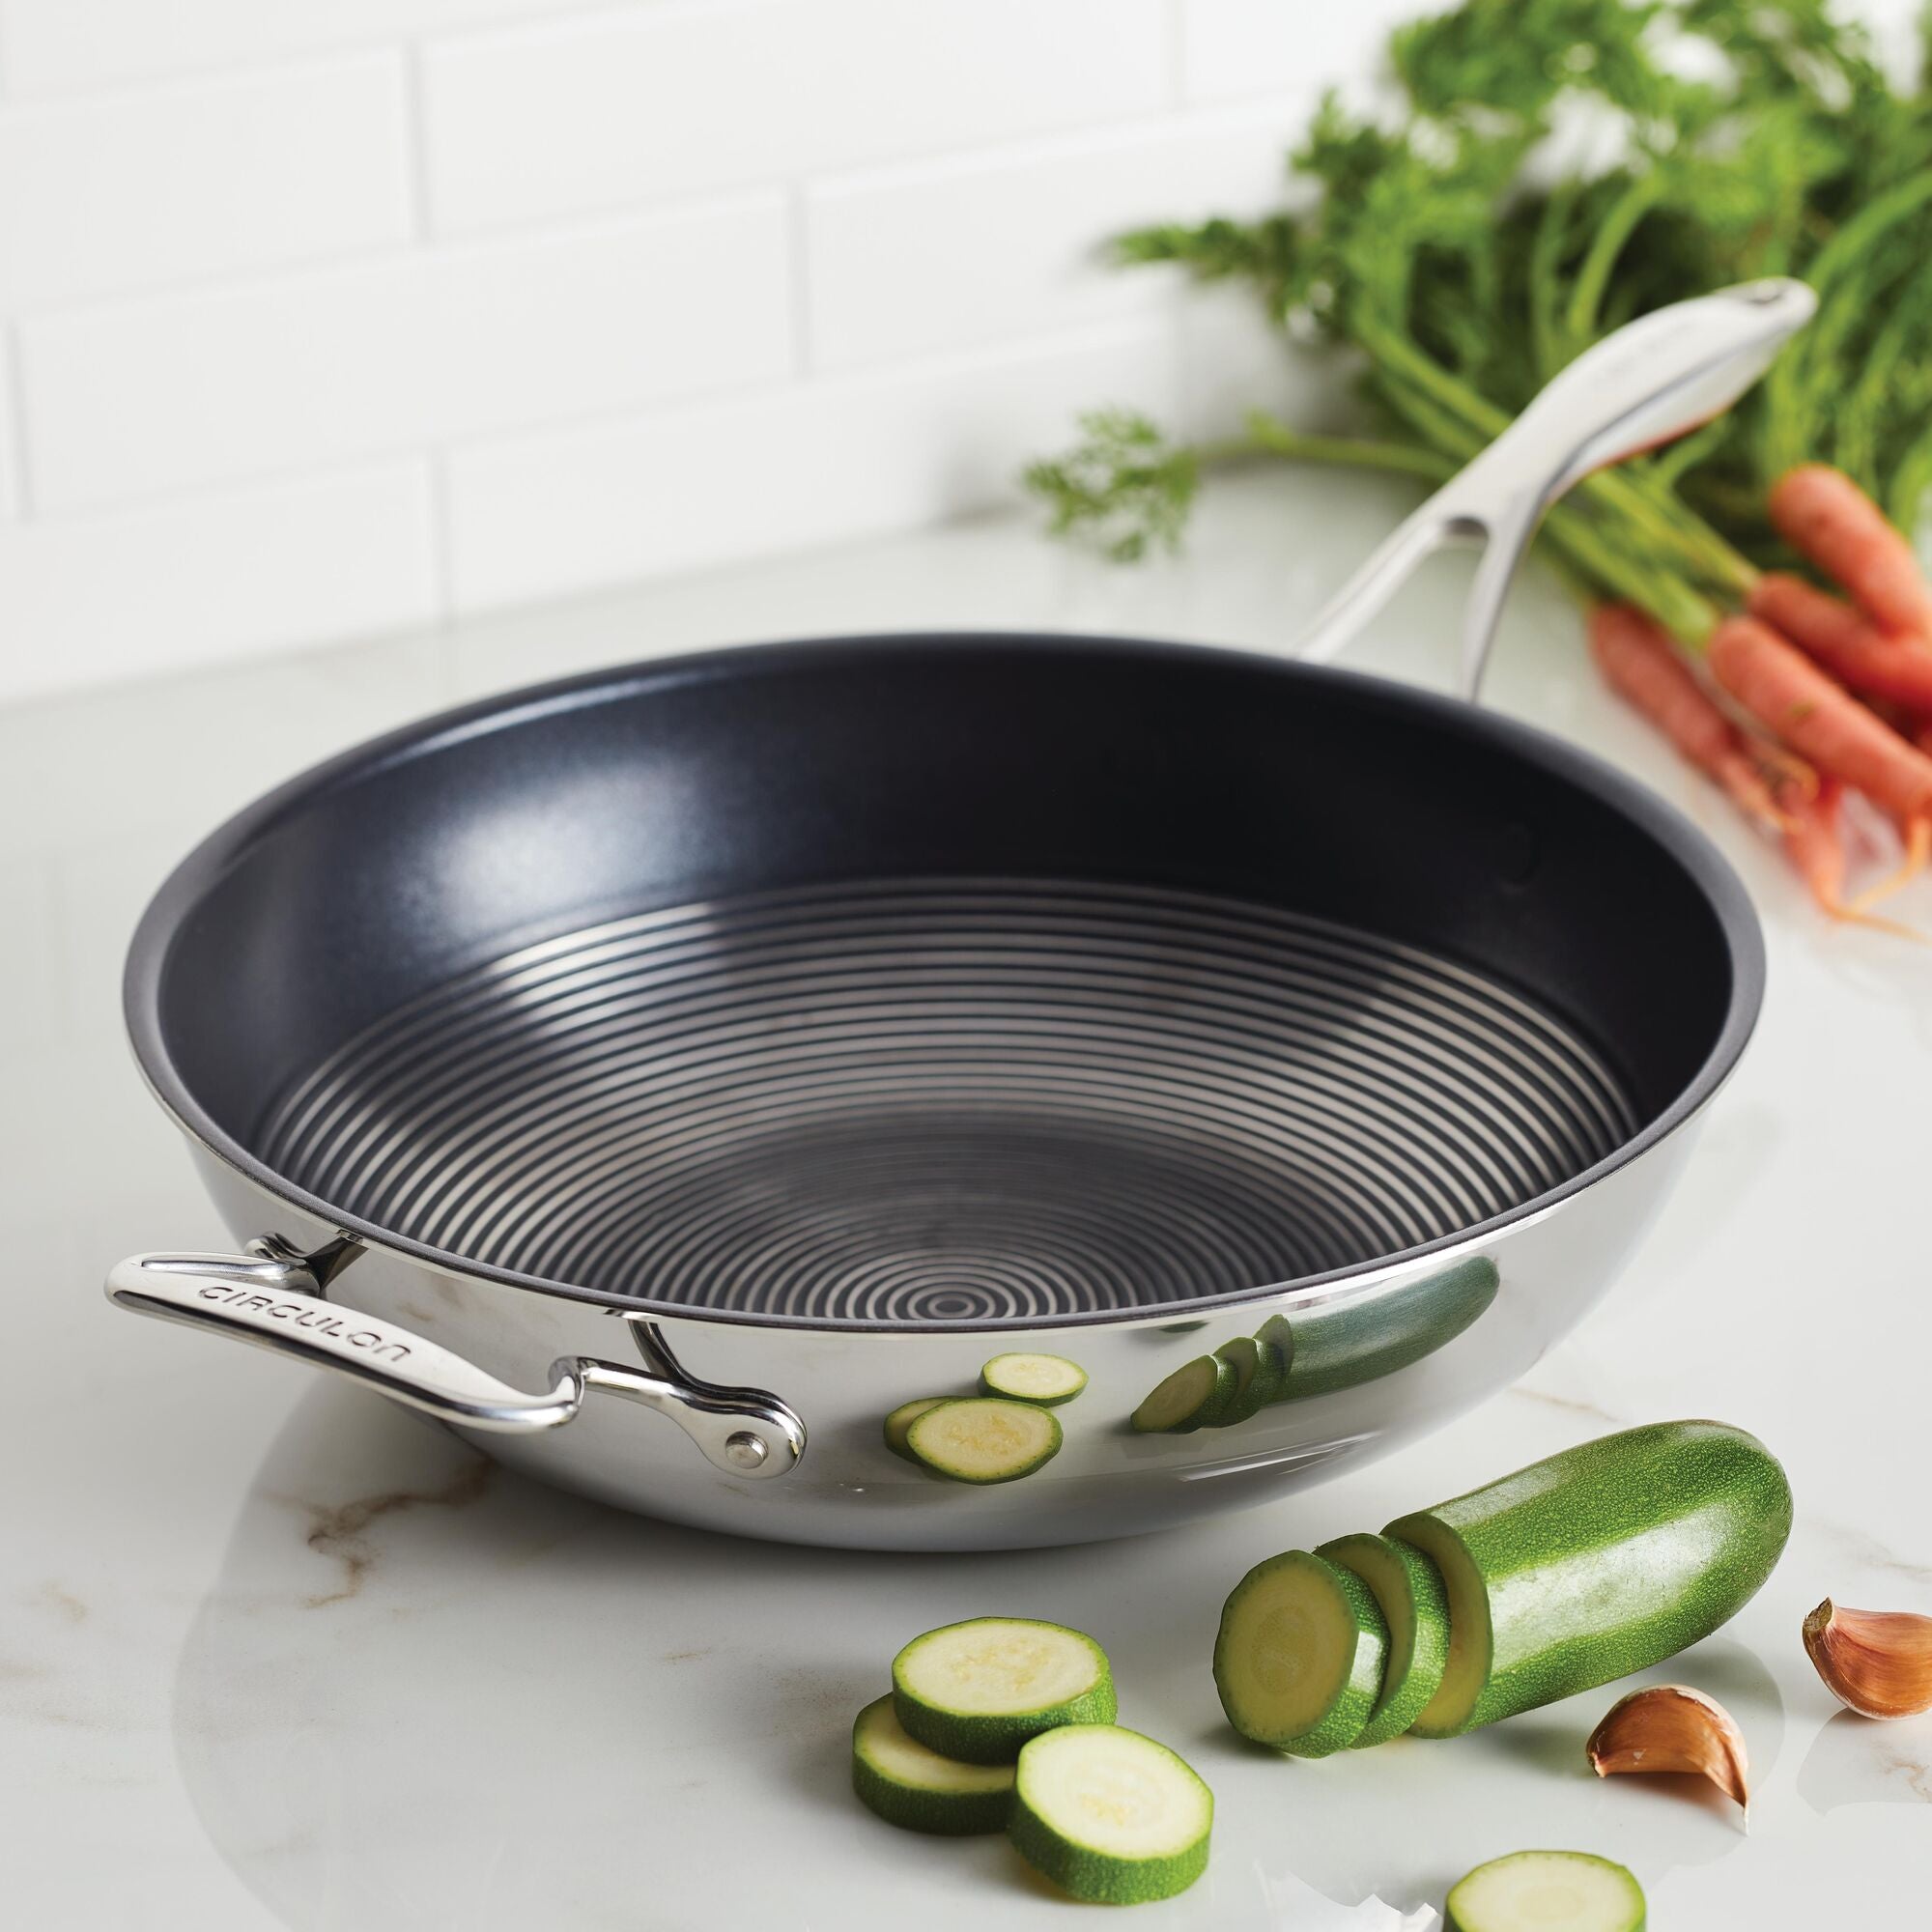 All-Clad Tri-Ply Stainless-Steel Stir Fry Pan